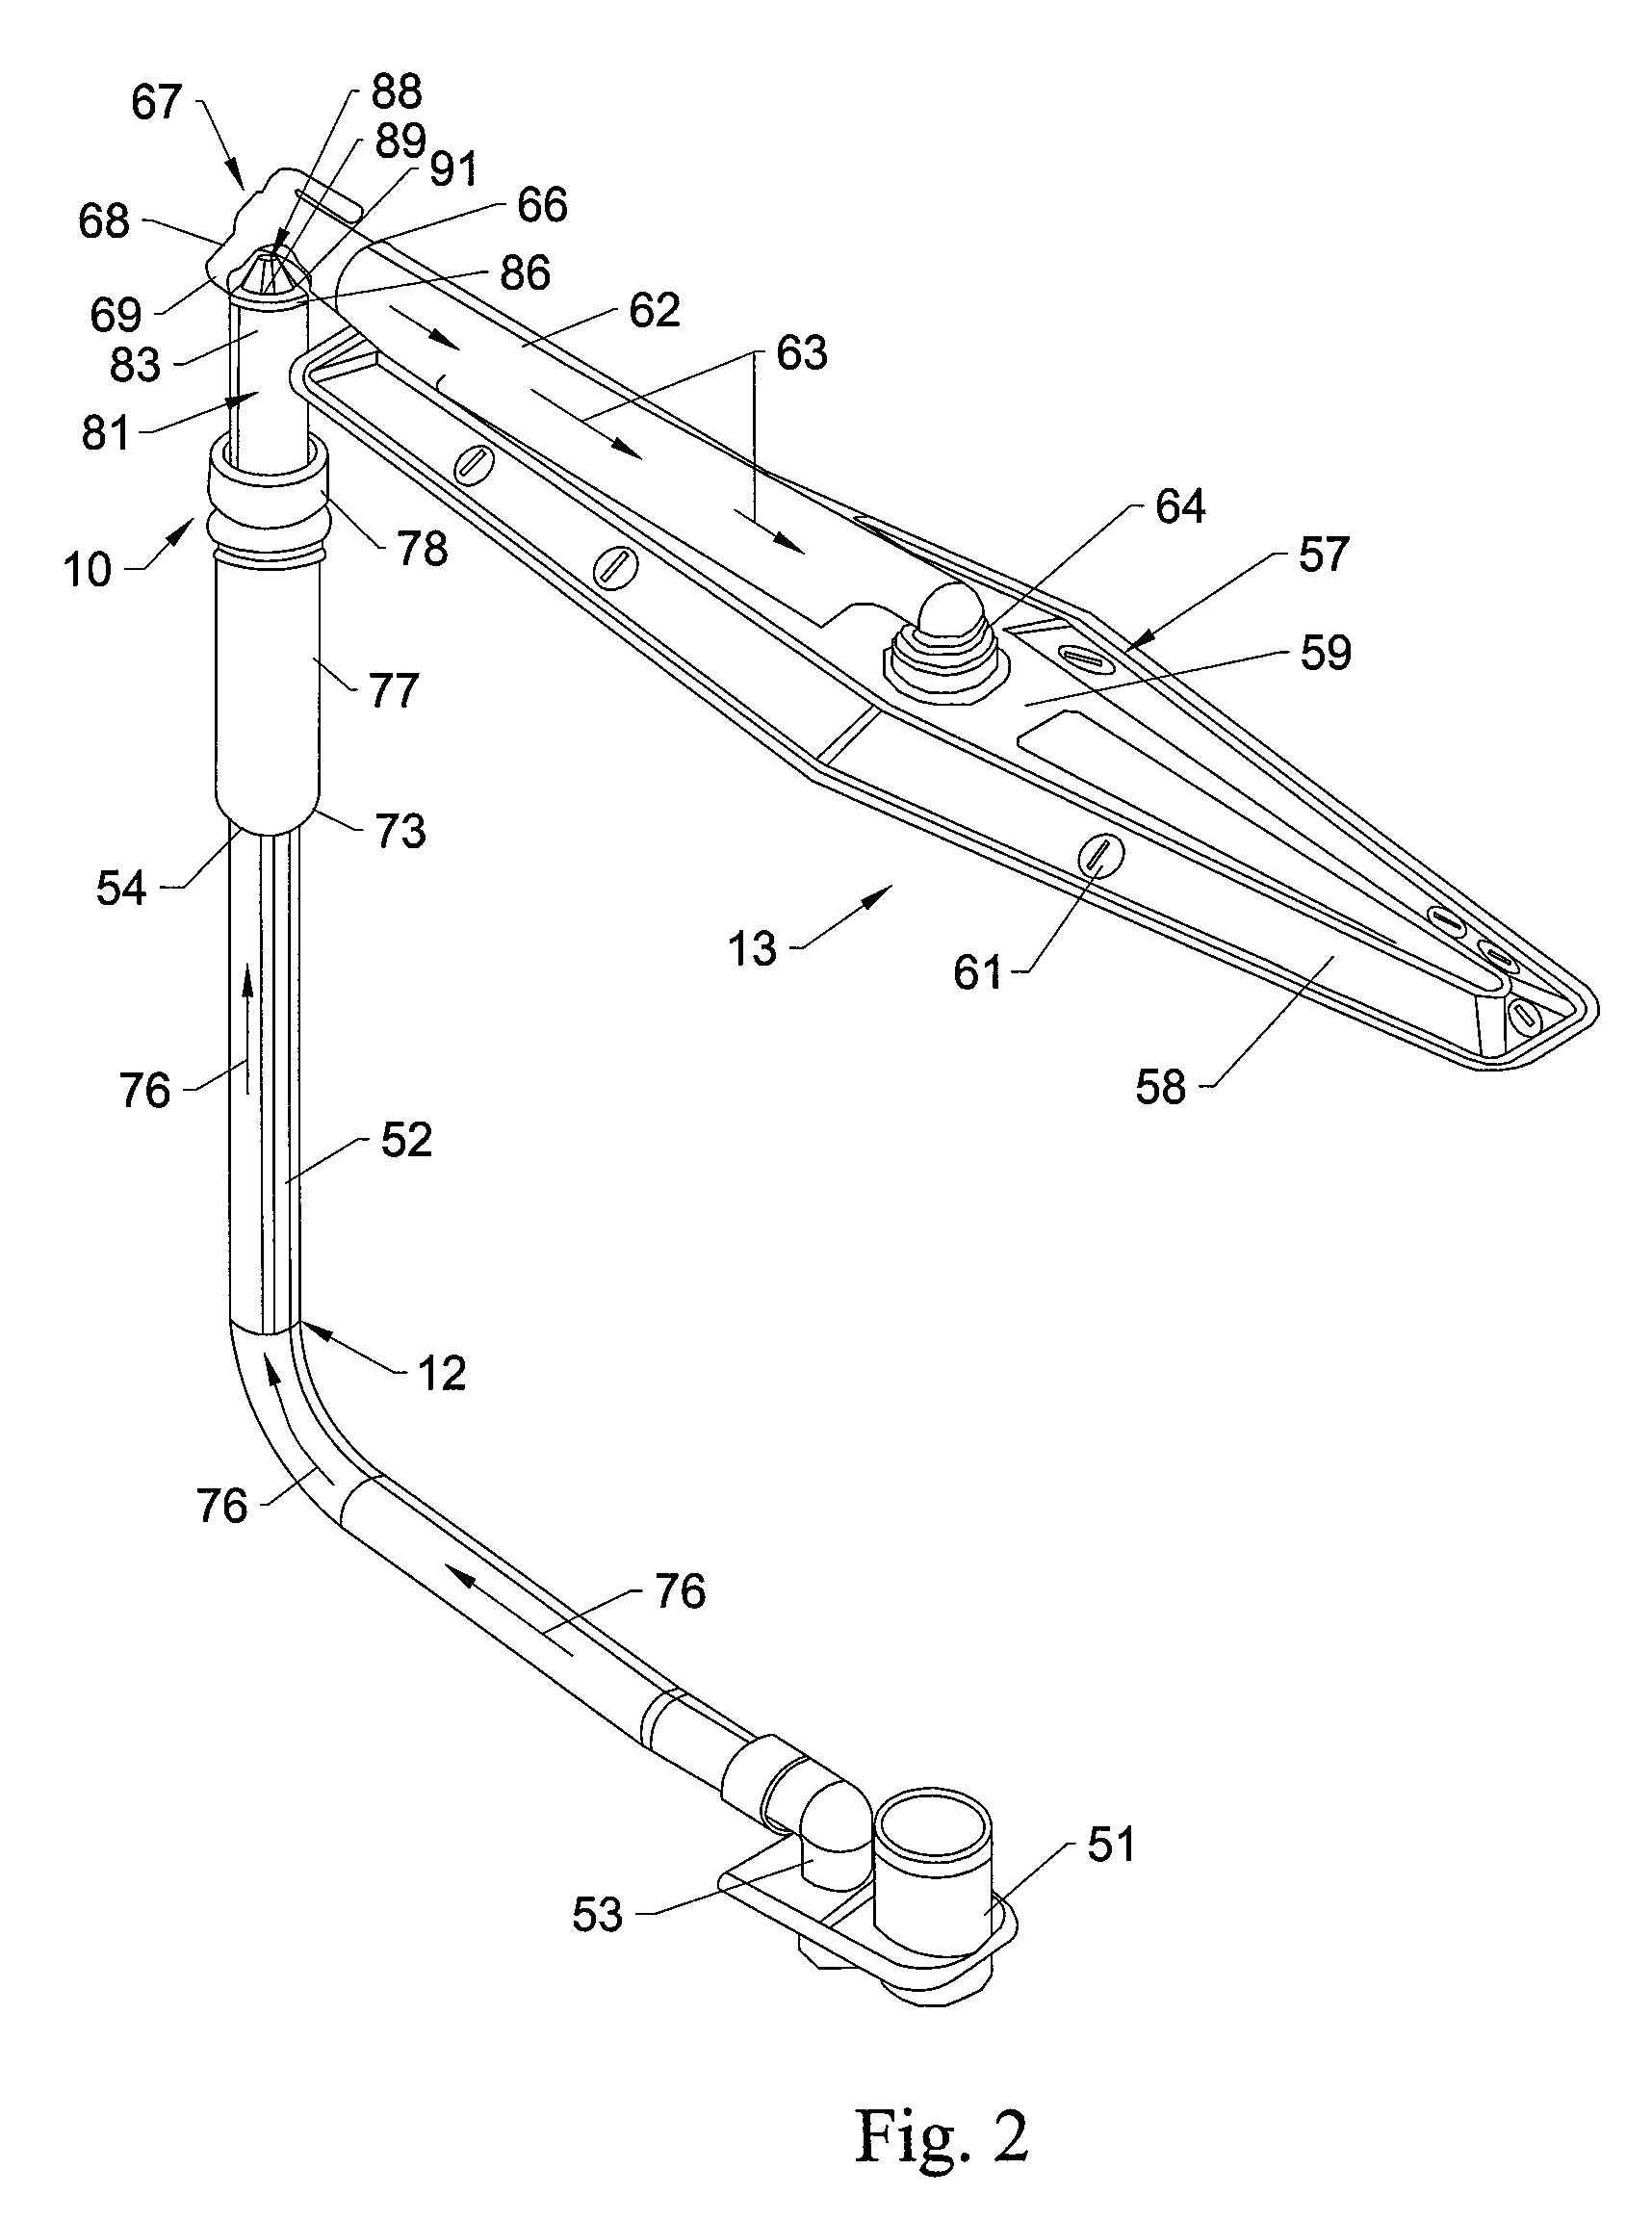 Fluid Coupling Assembly for a Dishwasher